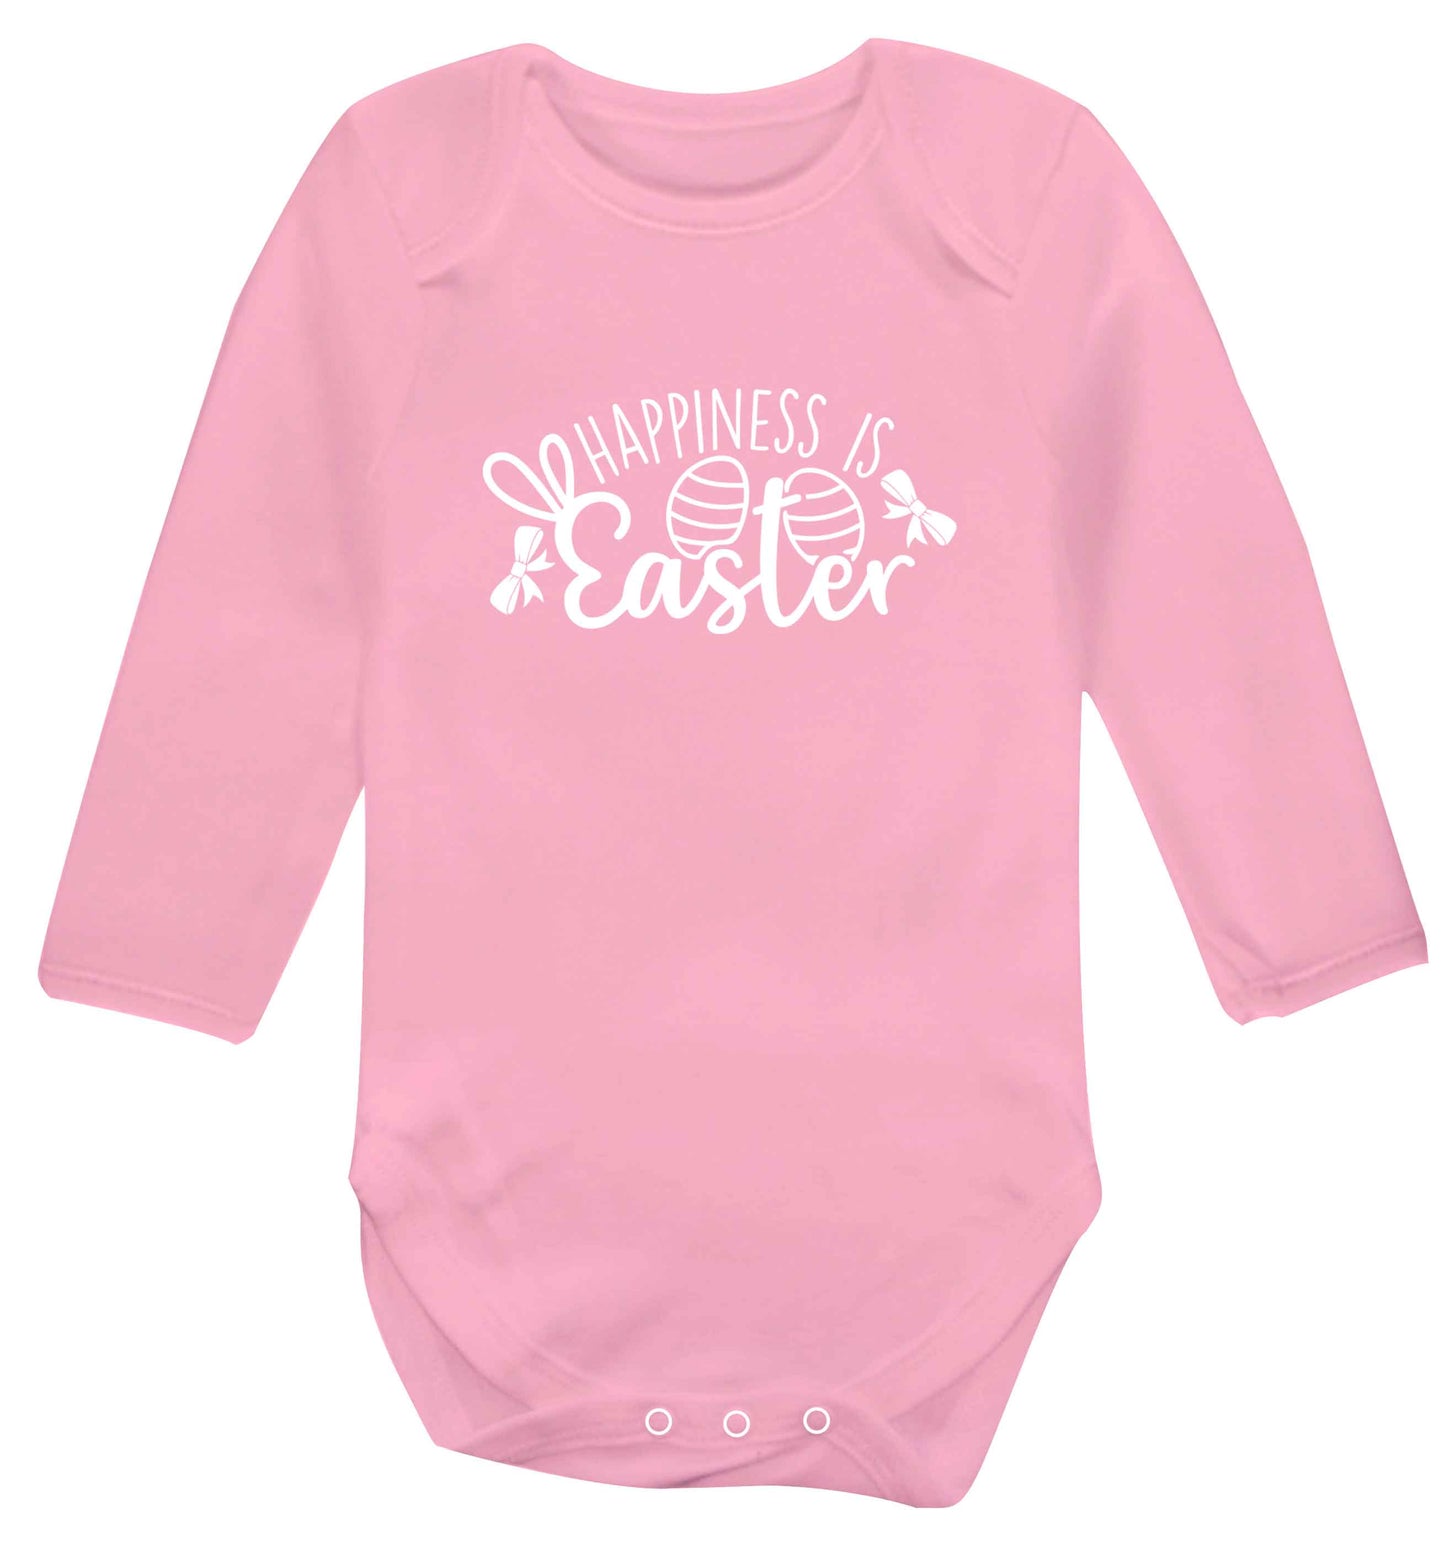 Happiness is easter baby vest long sleeved pale pink 6-12 months